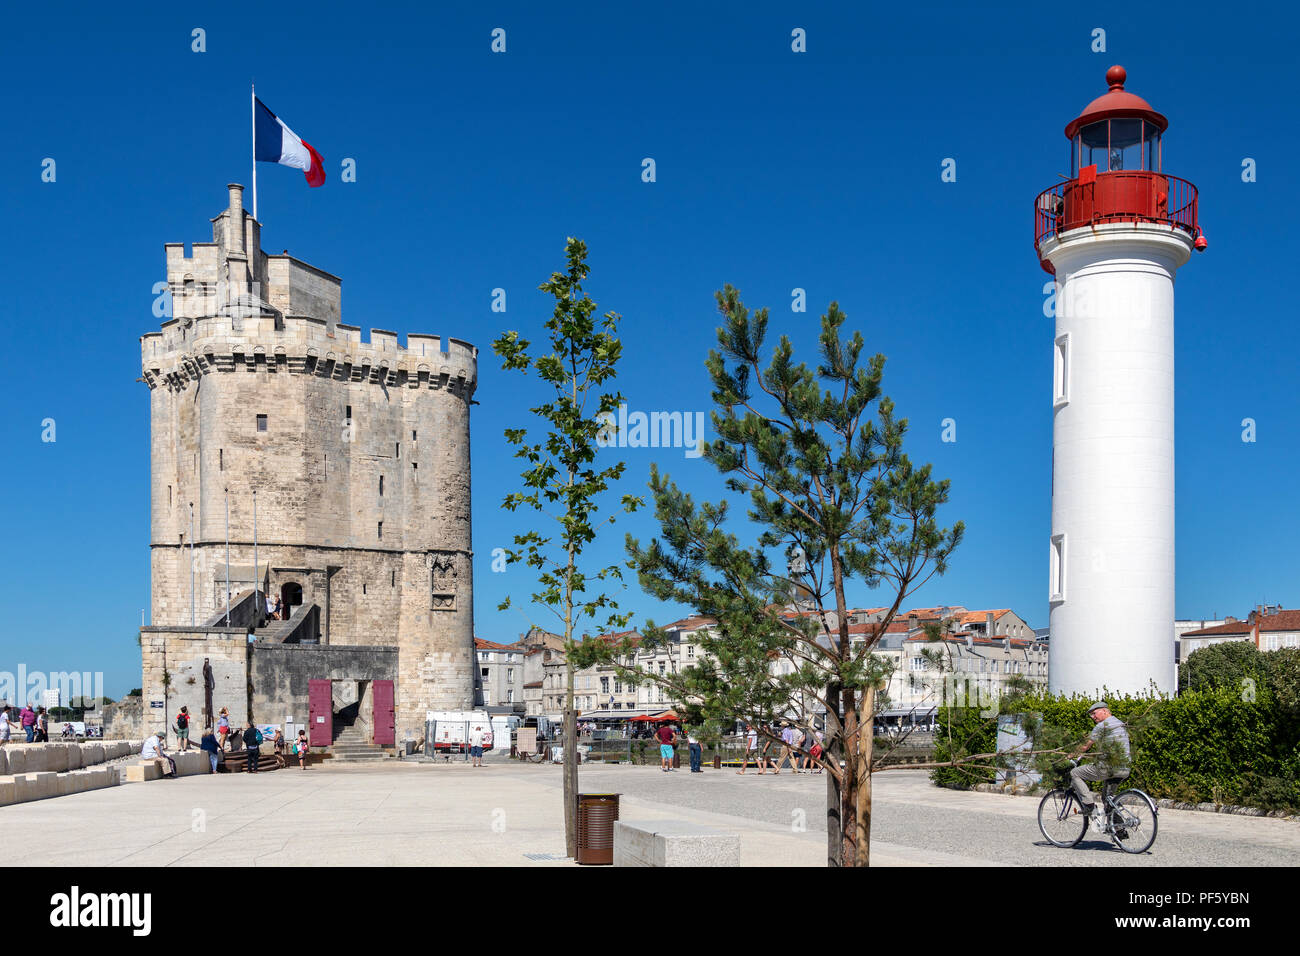 Lighthouse in the port of La Rochelle on the coast of the Poitou-Charentes region of France. The tower with the flag is the Tour de la Chaine which da Stock Photo